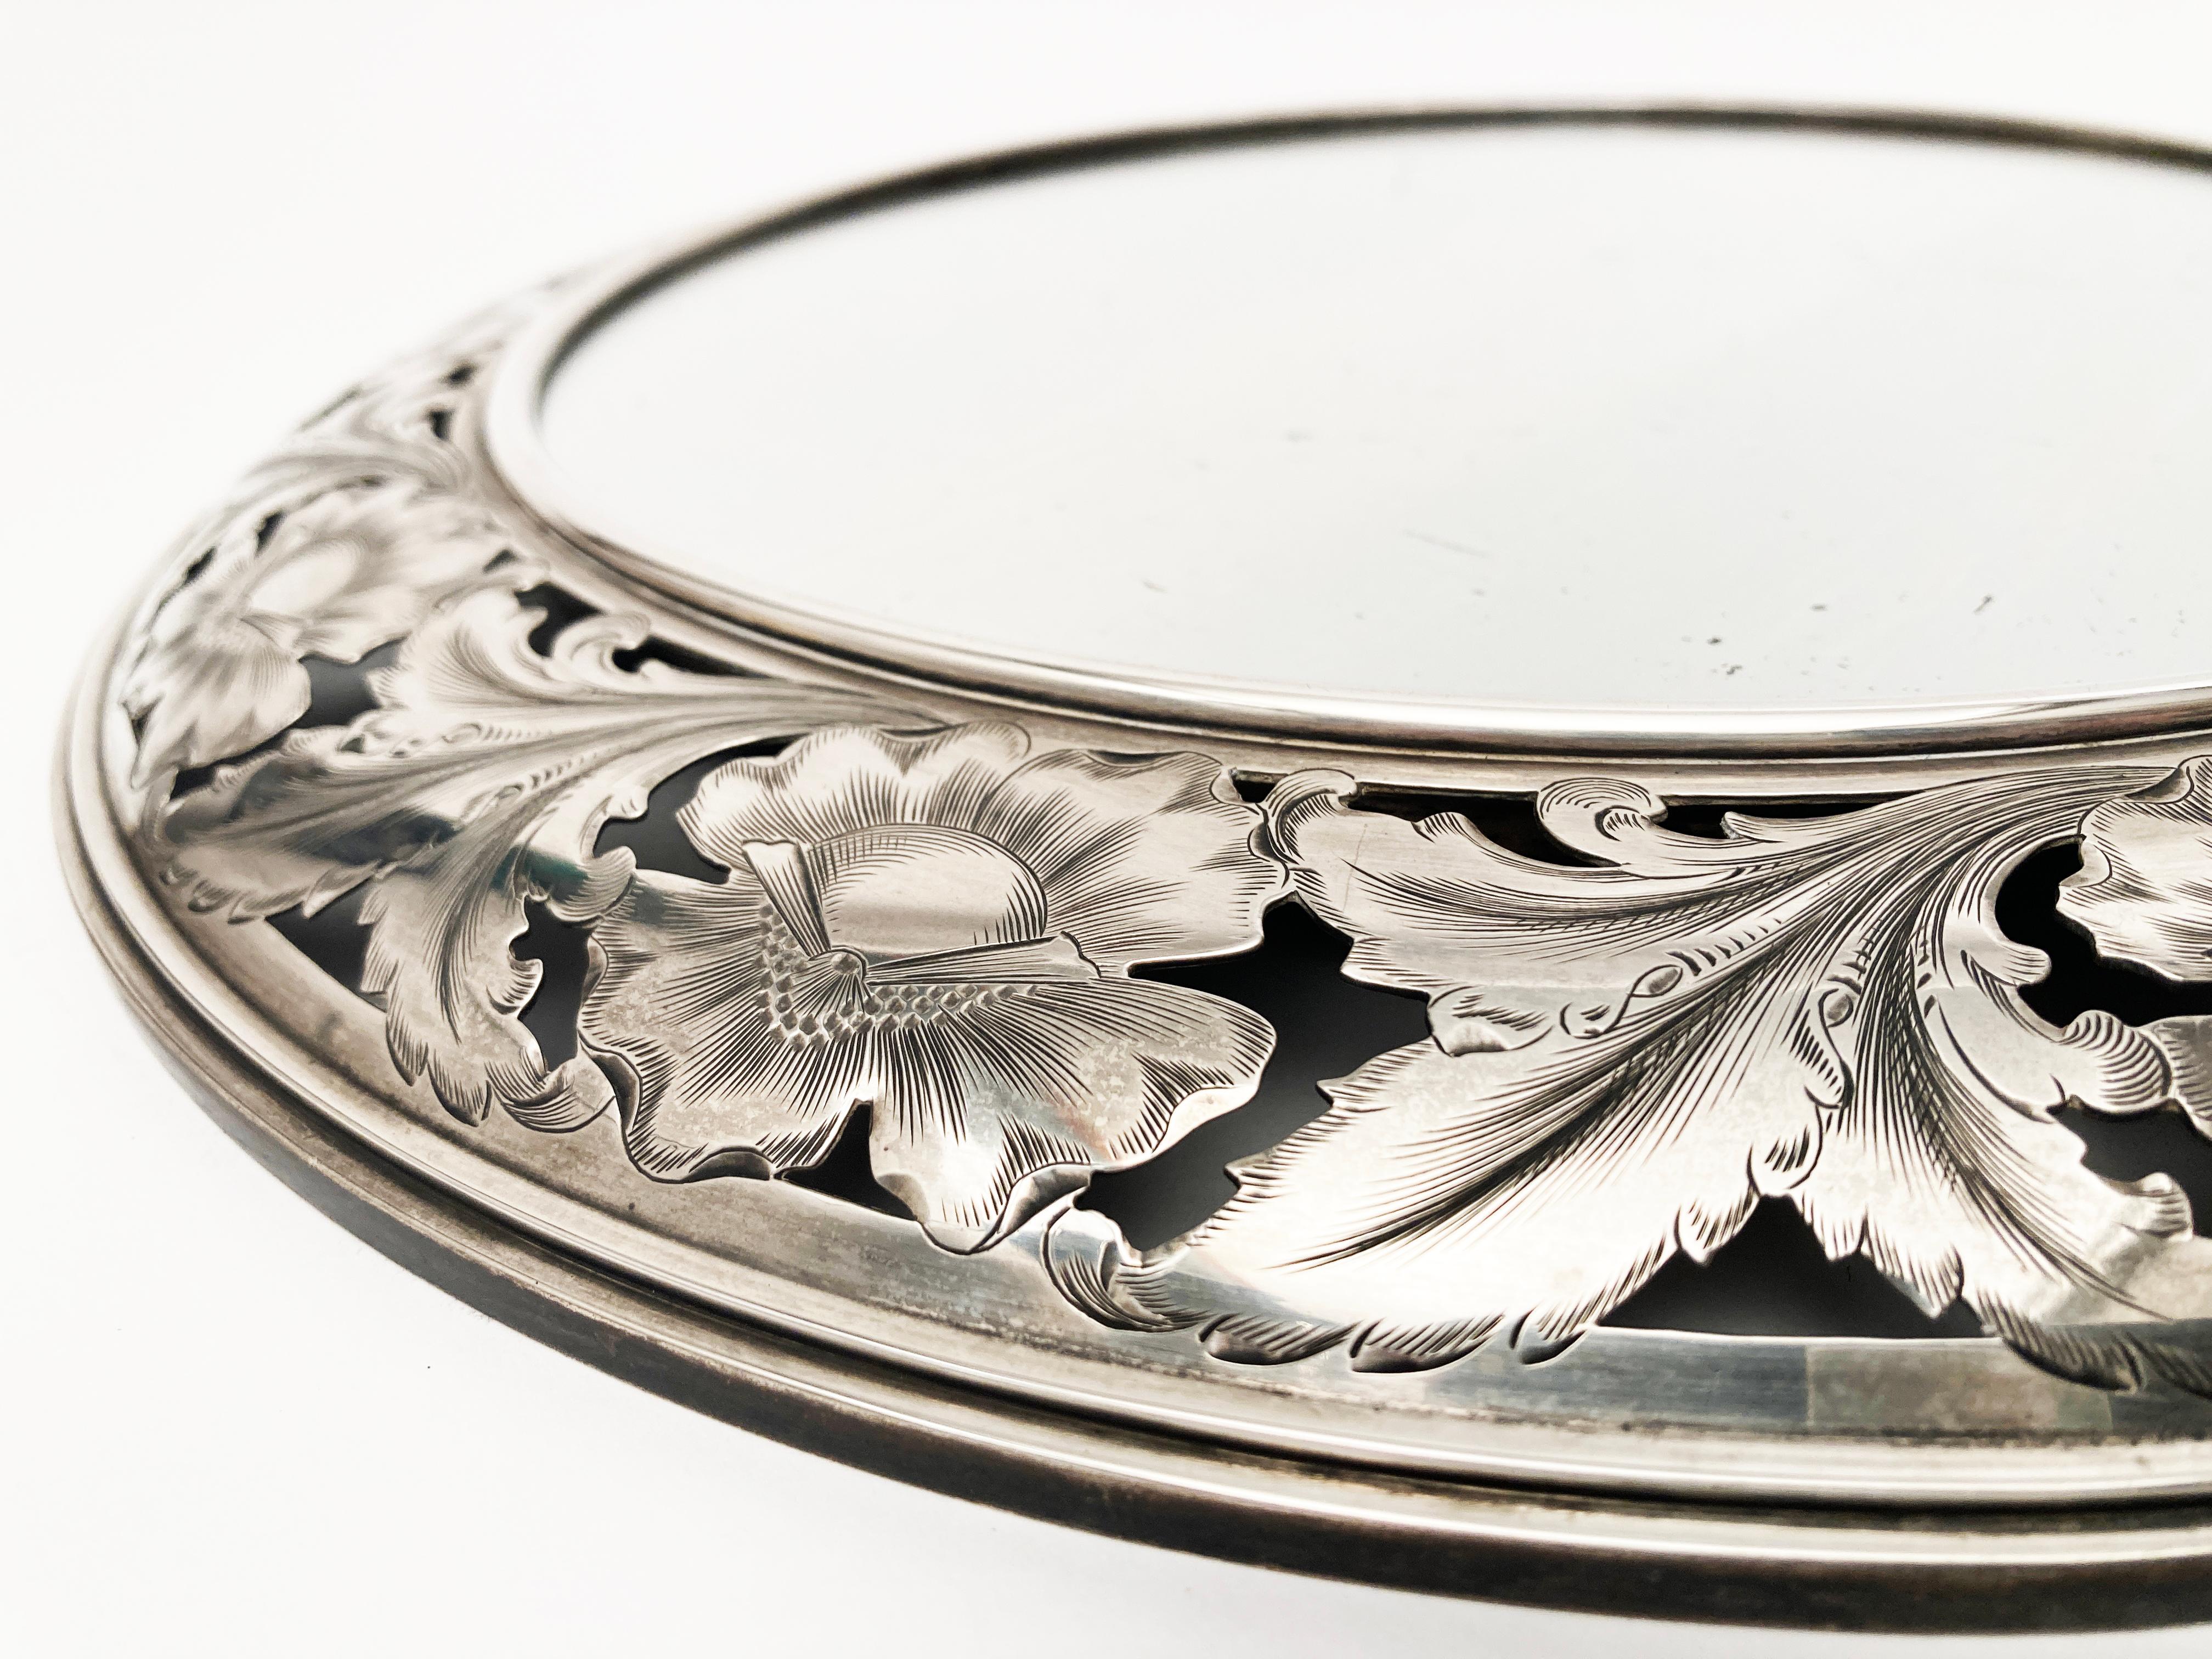 This ornate sterling silver framed circular mirror has detailed floral and foliate carvings/etchings in the silver with reticulation that makes this wall mirror exceptional. The piece is finished on the back with original green felt with a formed